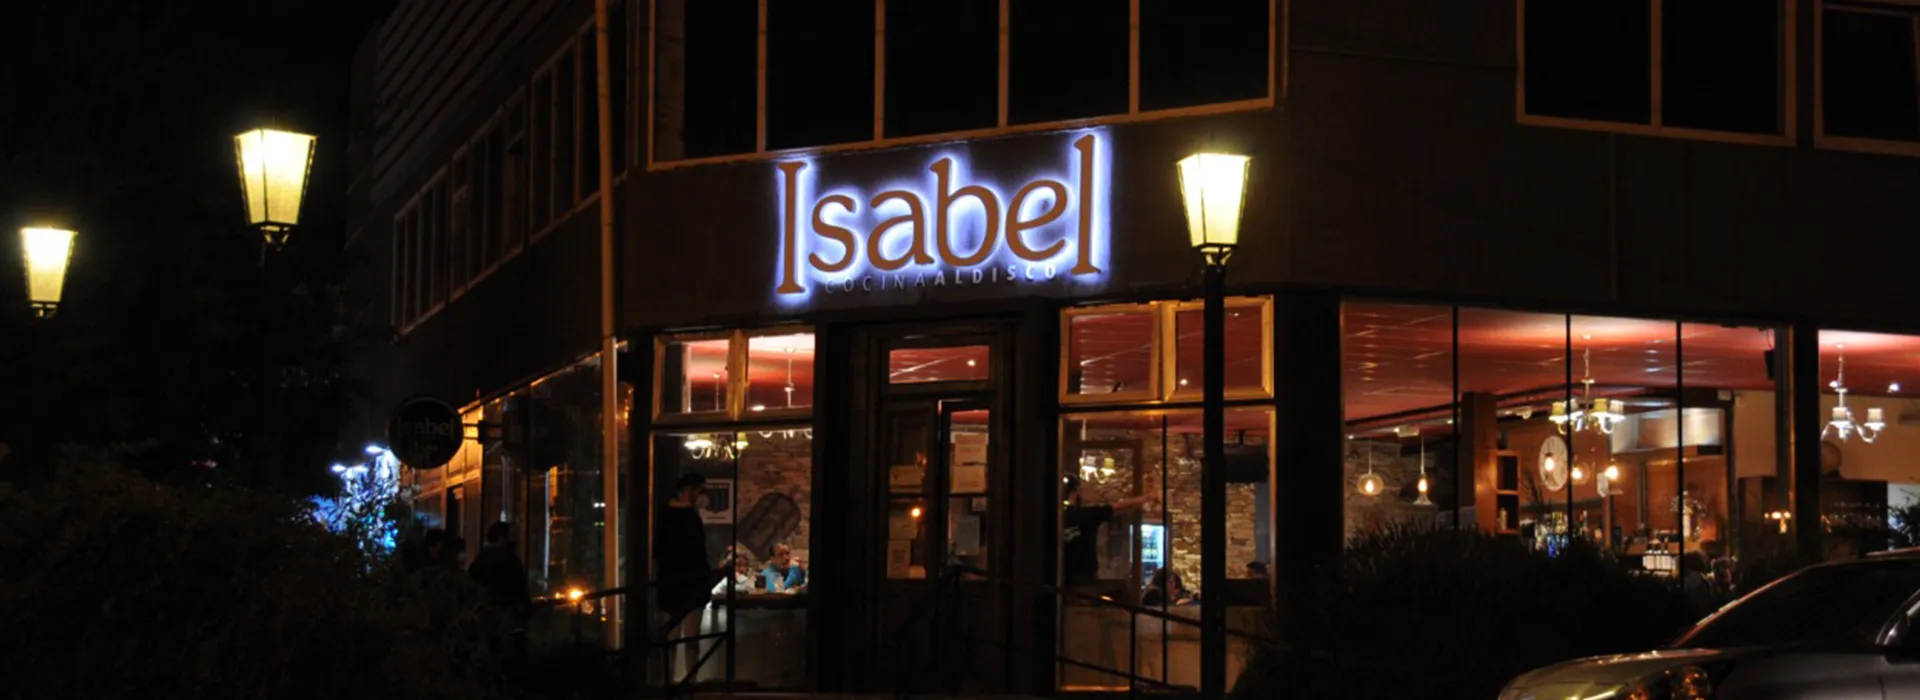 Isabel Cocina al Disco in Argentina, South America | Restaurants - Rated 4.3